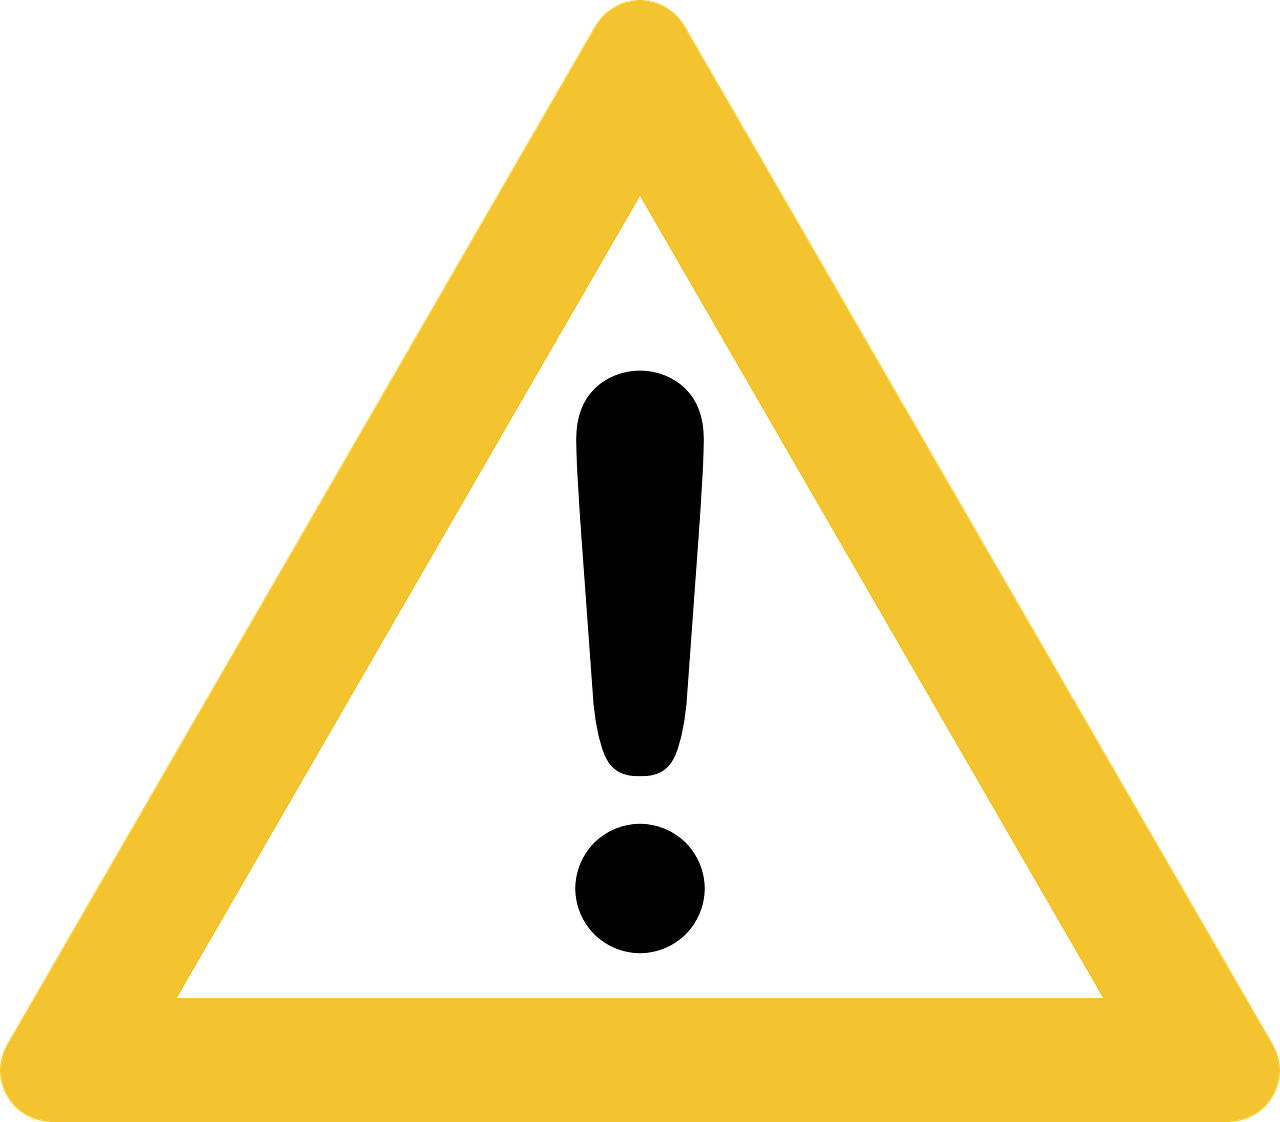 Exclamation Warning Sign PNG image